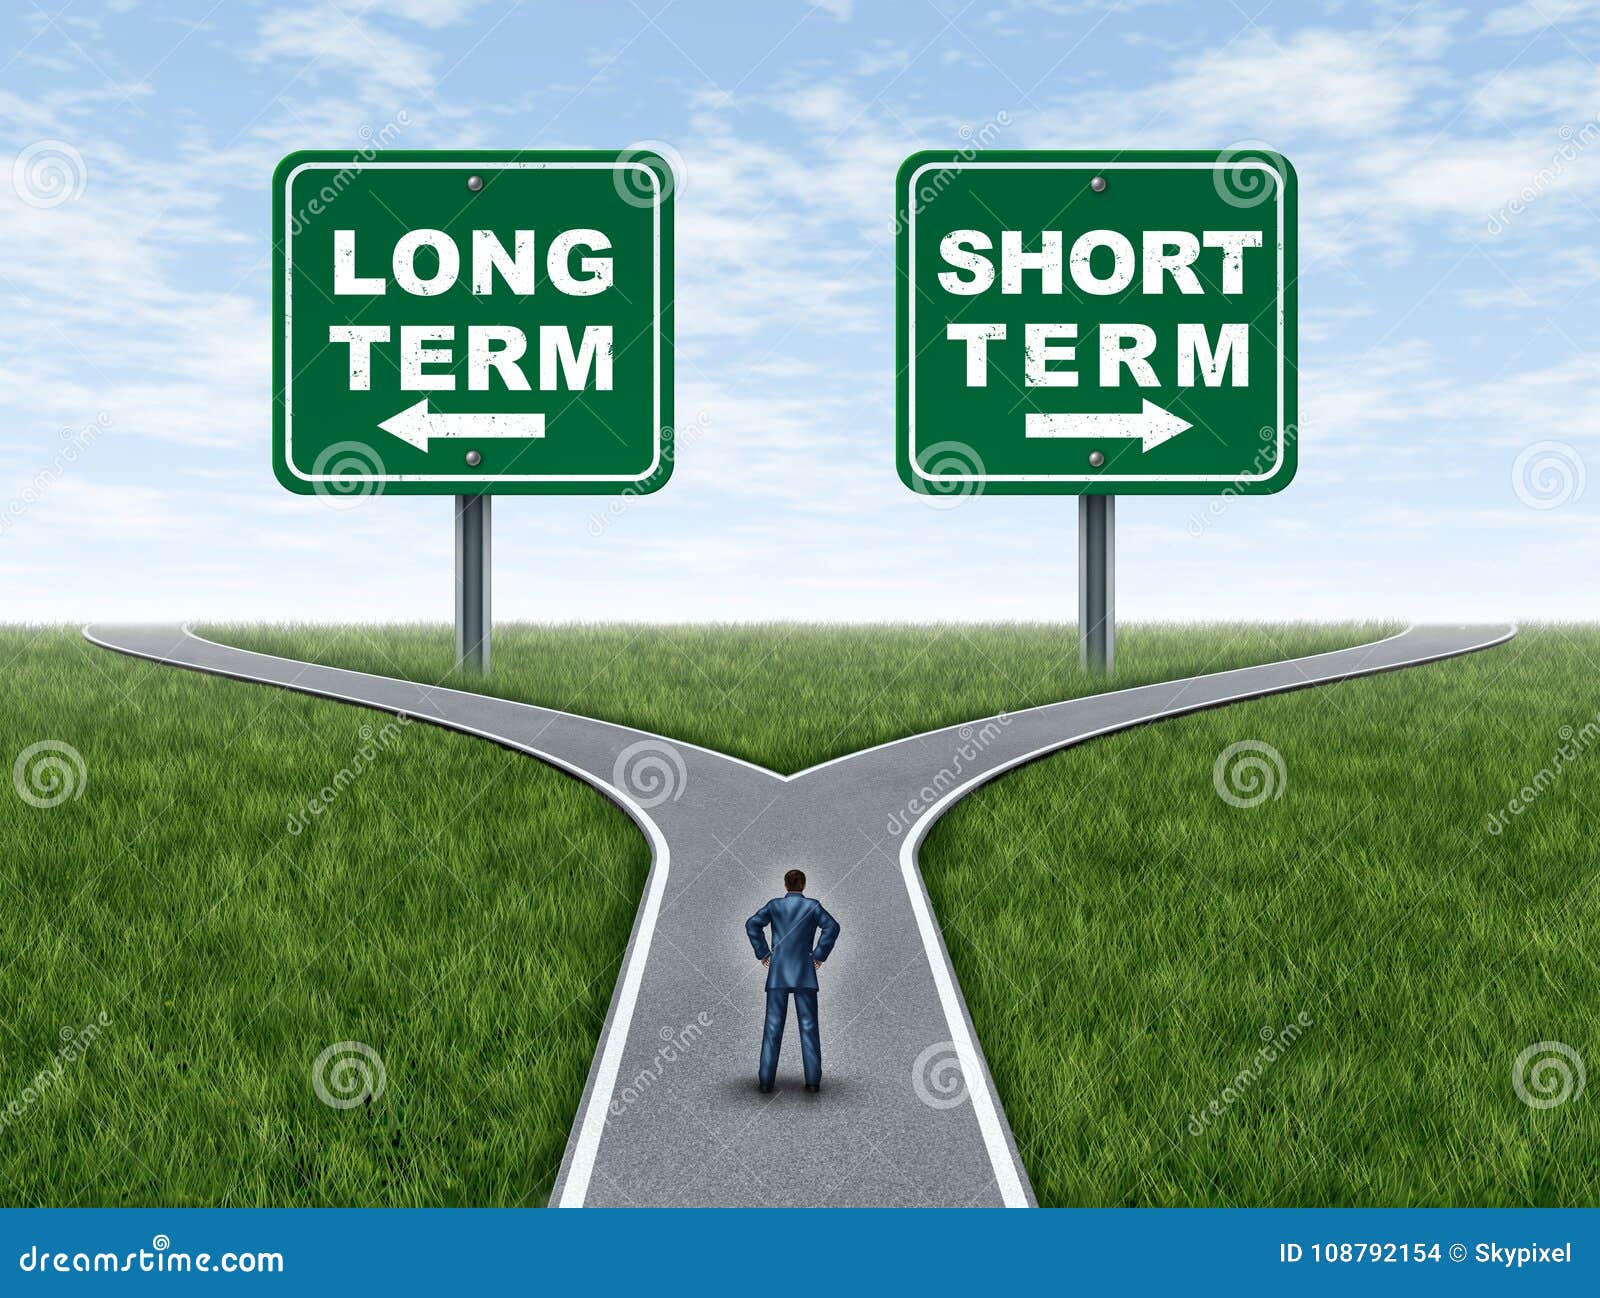 long term and short term investing